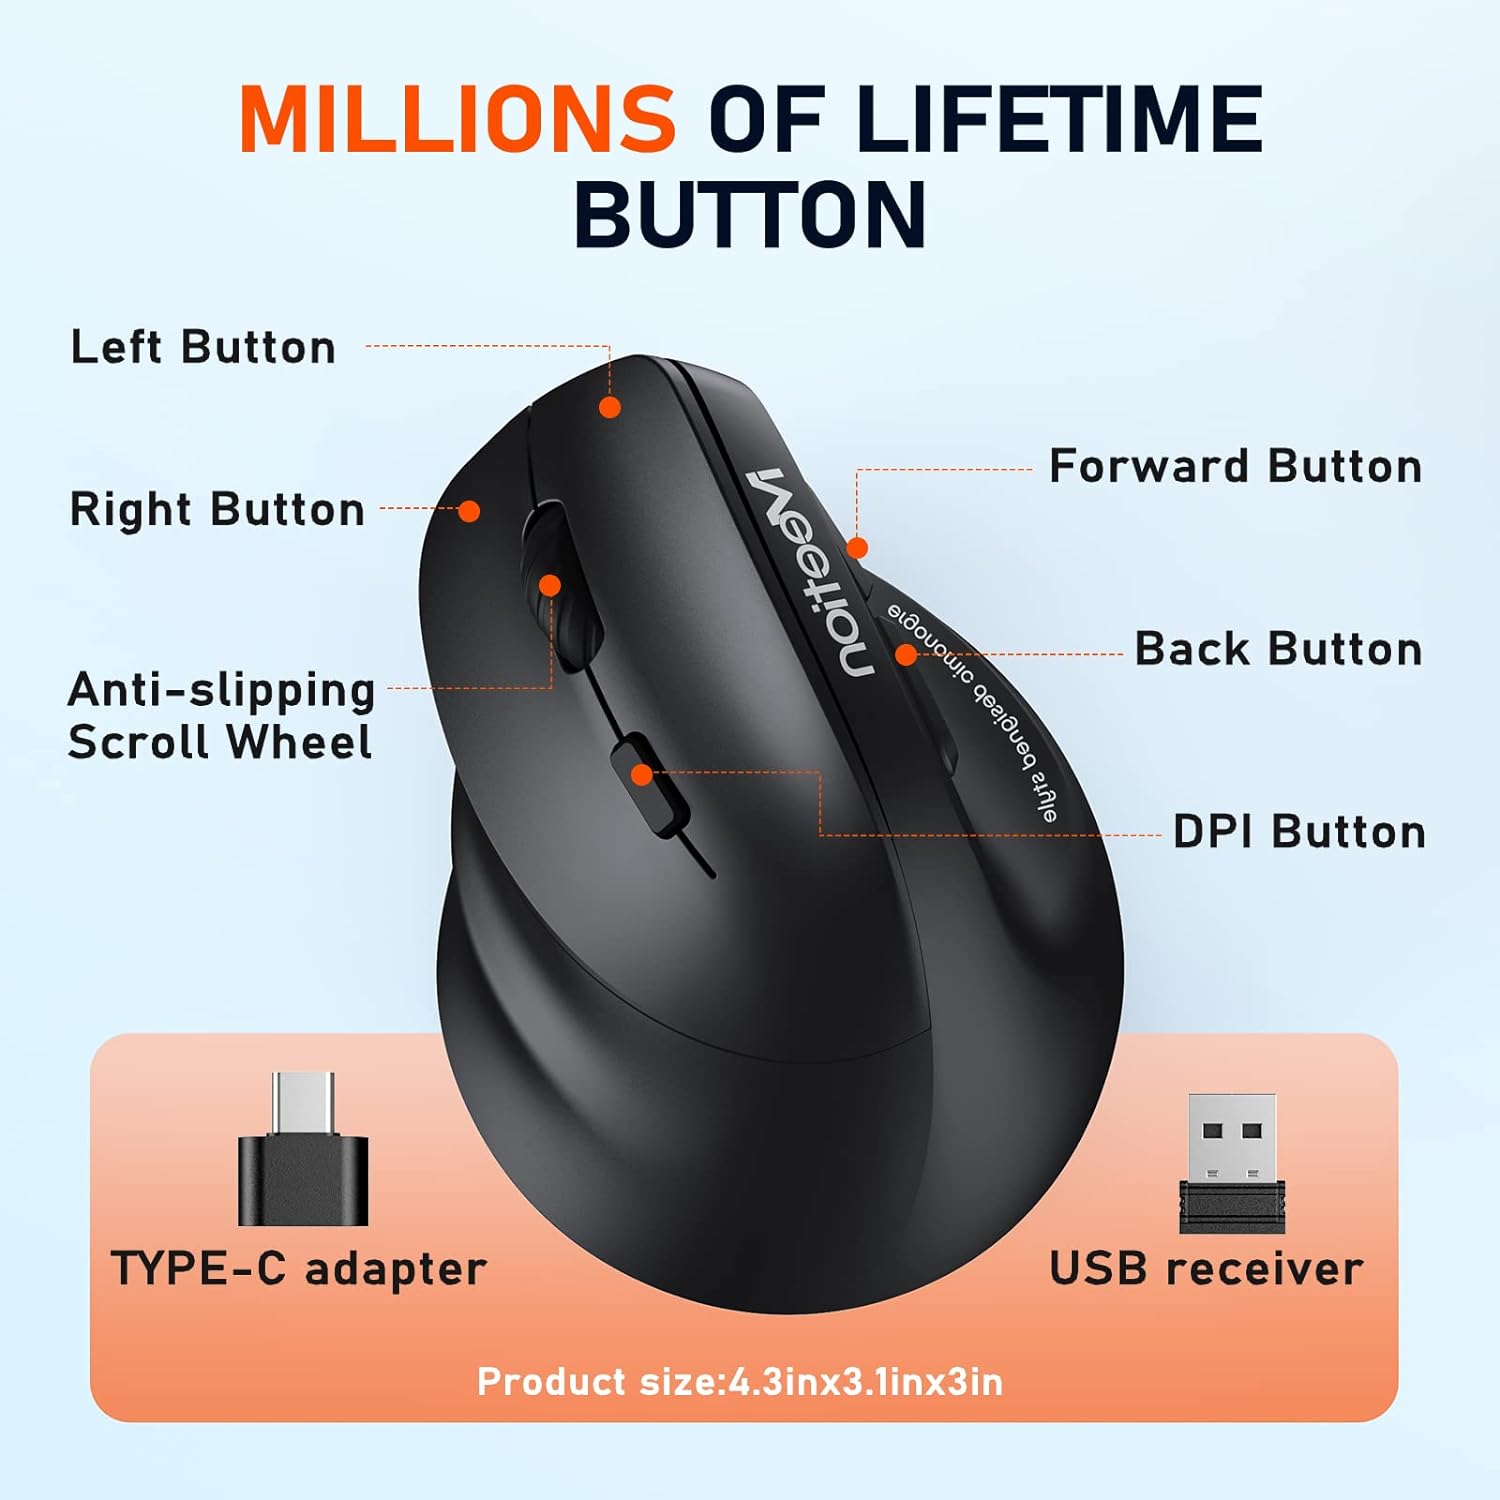 MEETION Left-Handed Mouse Review